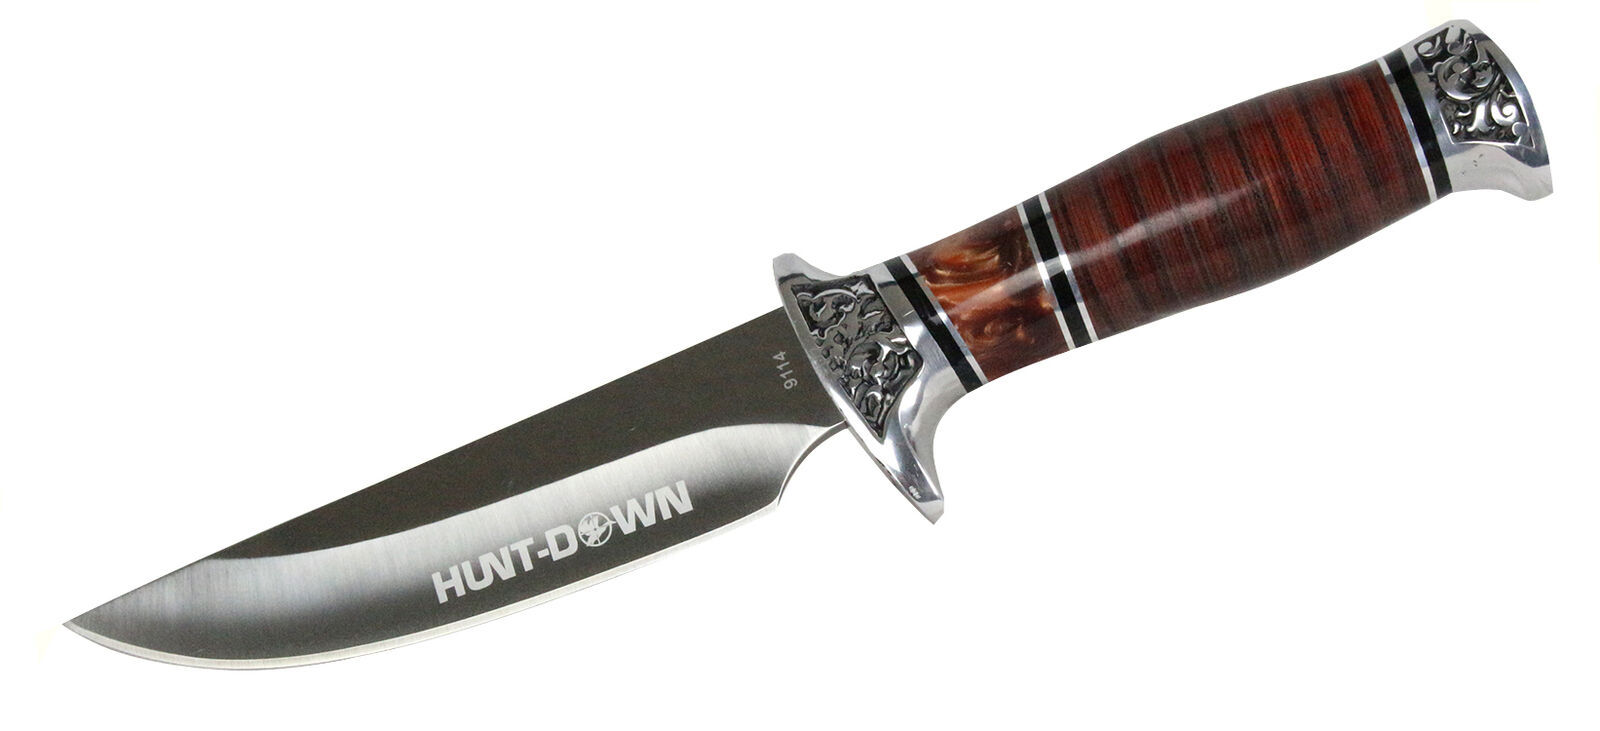 10in Hunt-Down Fixed Blade Knife with engraved Handle and Leather Sheath